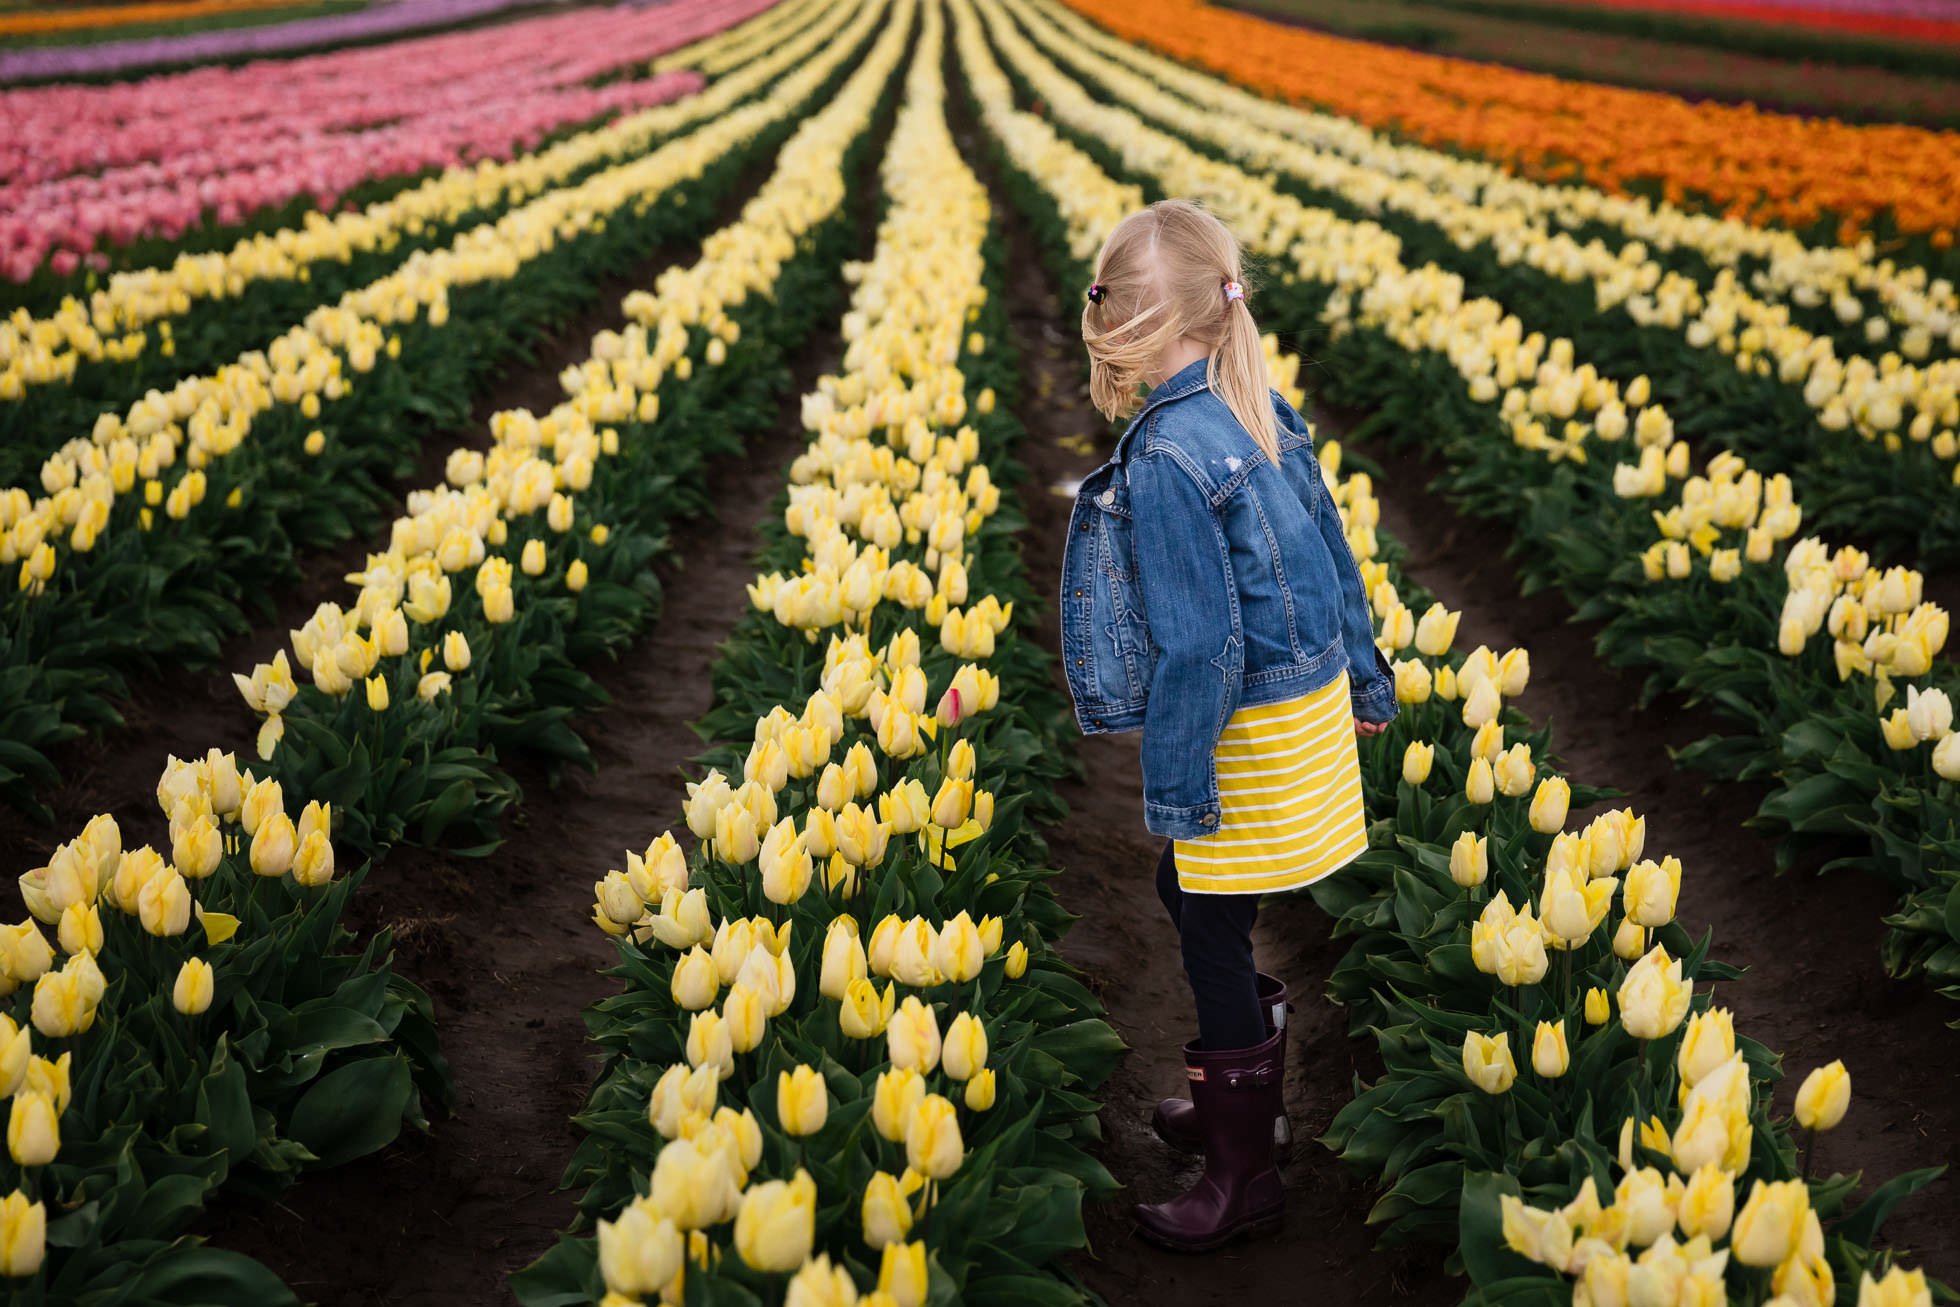 wind blows girls hair standing in tulip fields by rebecca hunnicutt farren childrens photographer in portland oregon and vancouver washington